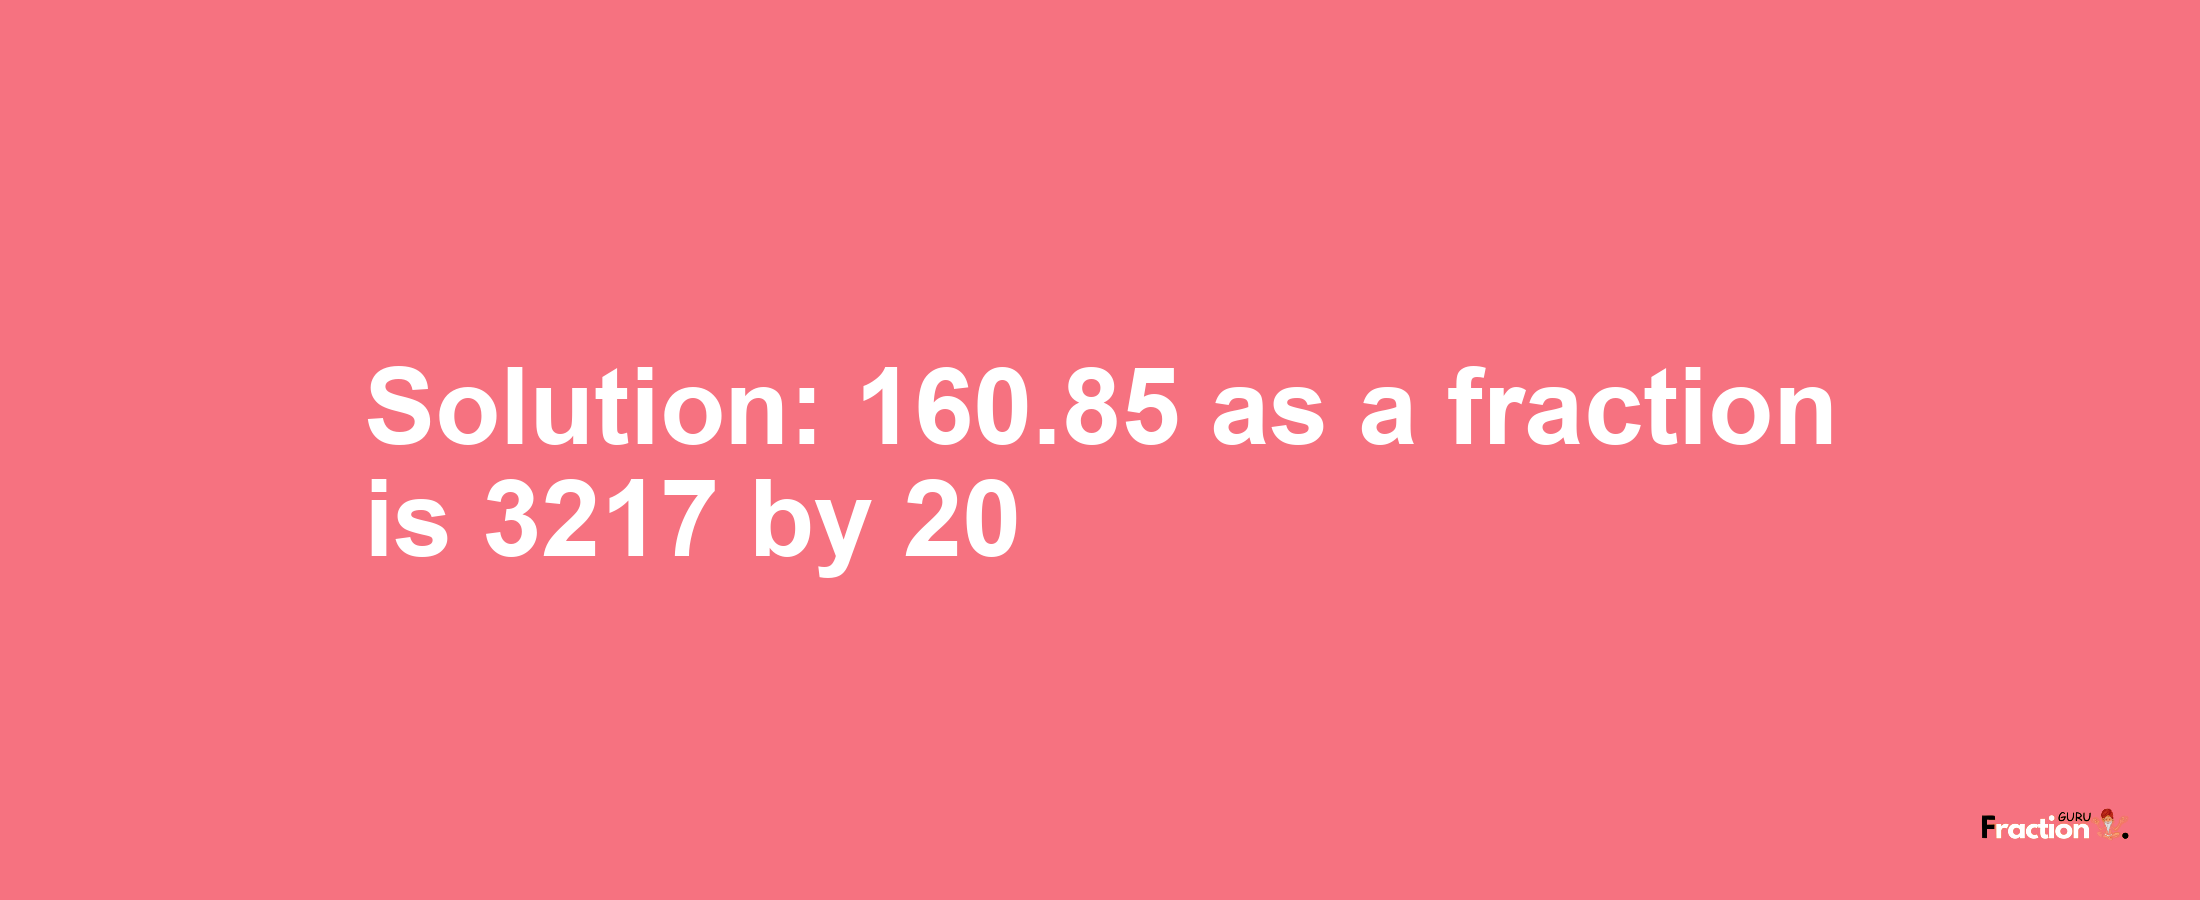 Solution:160.85 as a fraction is 3217/20